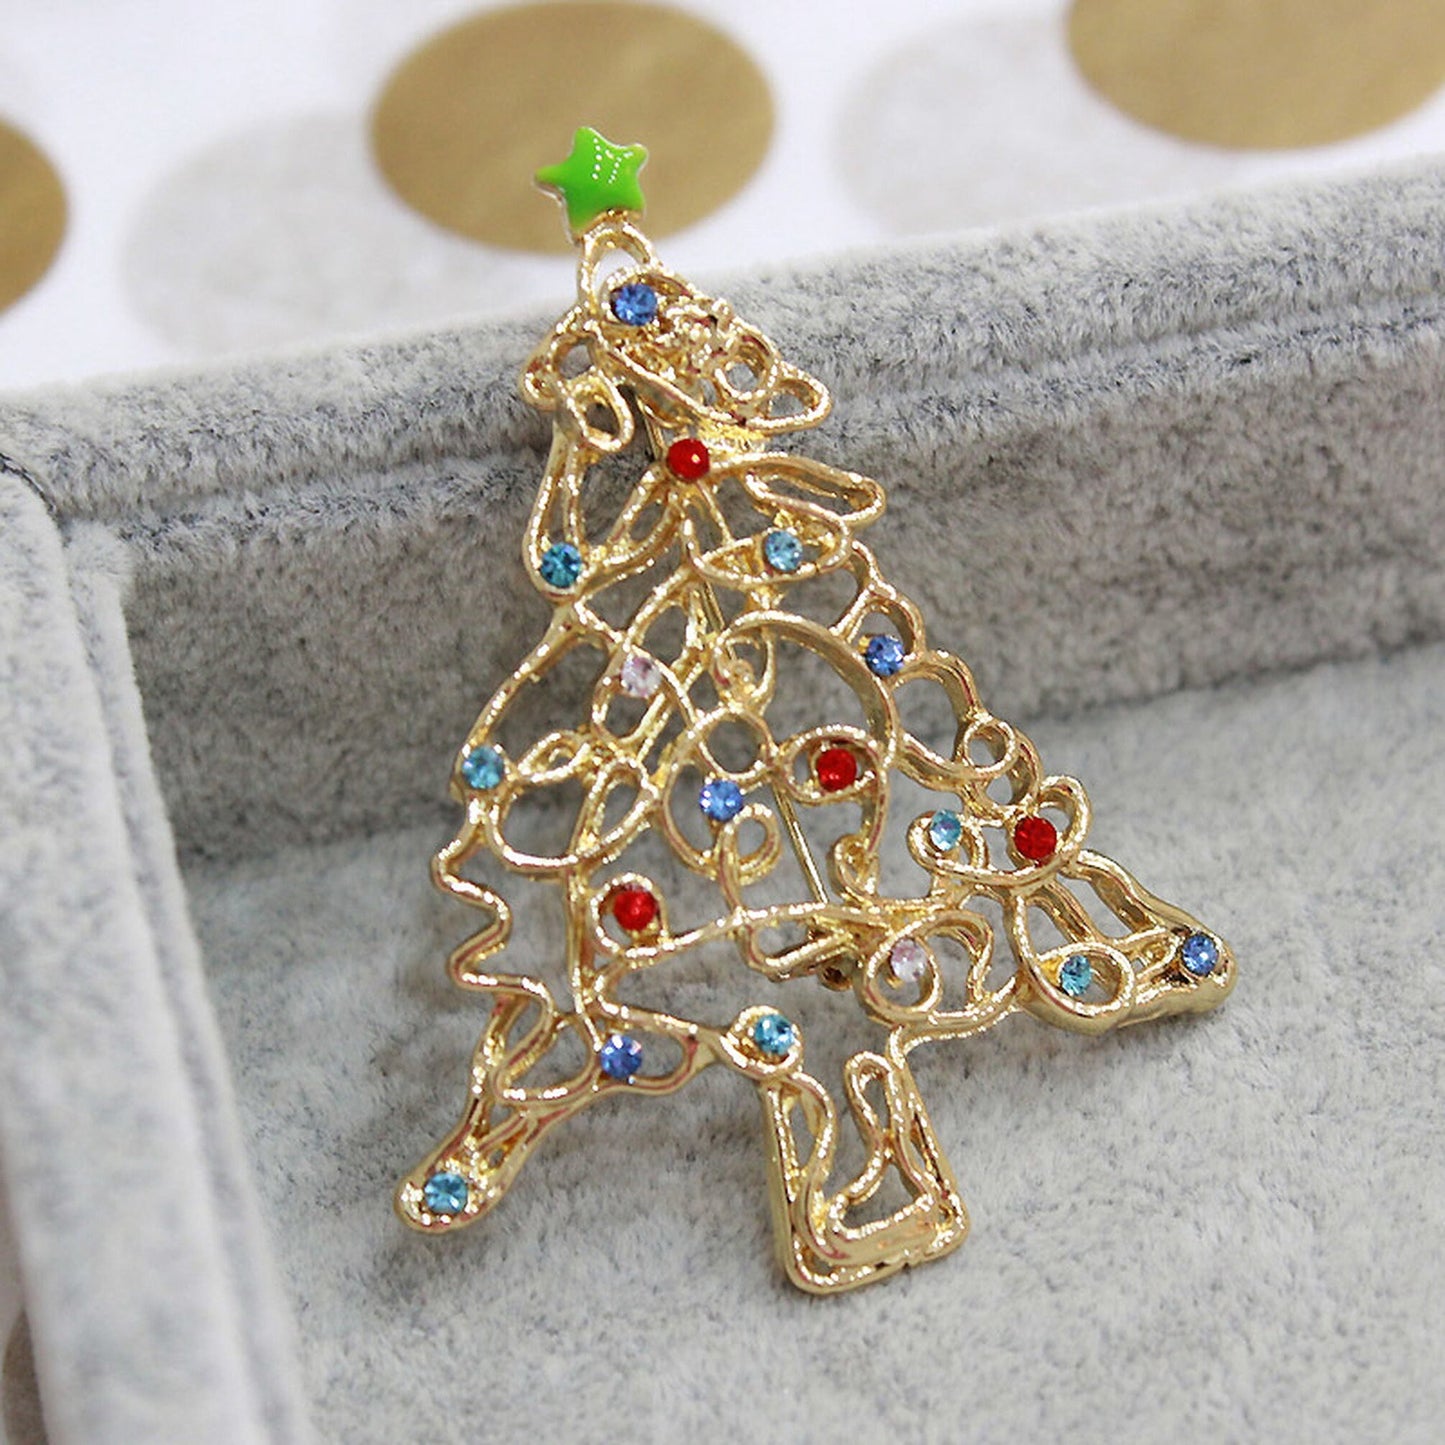 Gold Plated Christmas Tree with Baubles Brooch